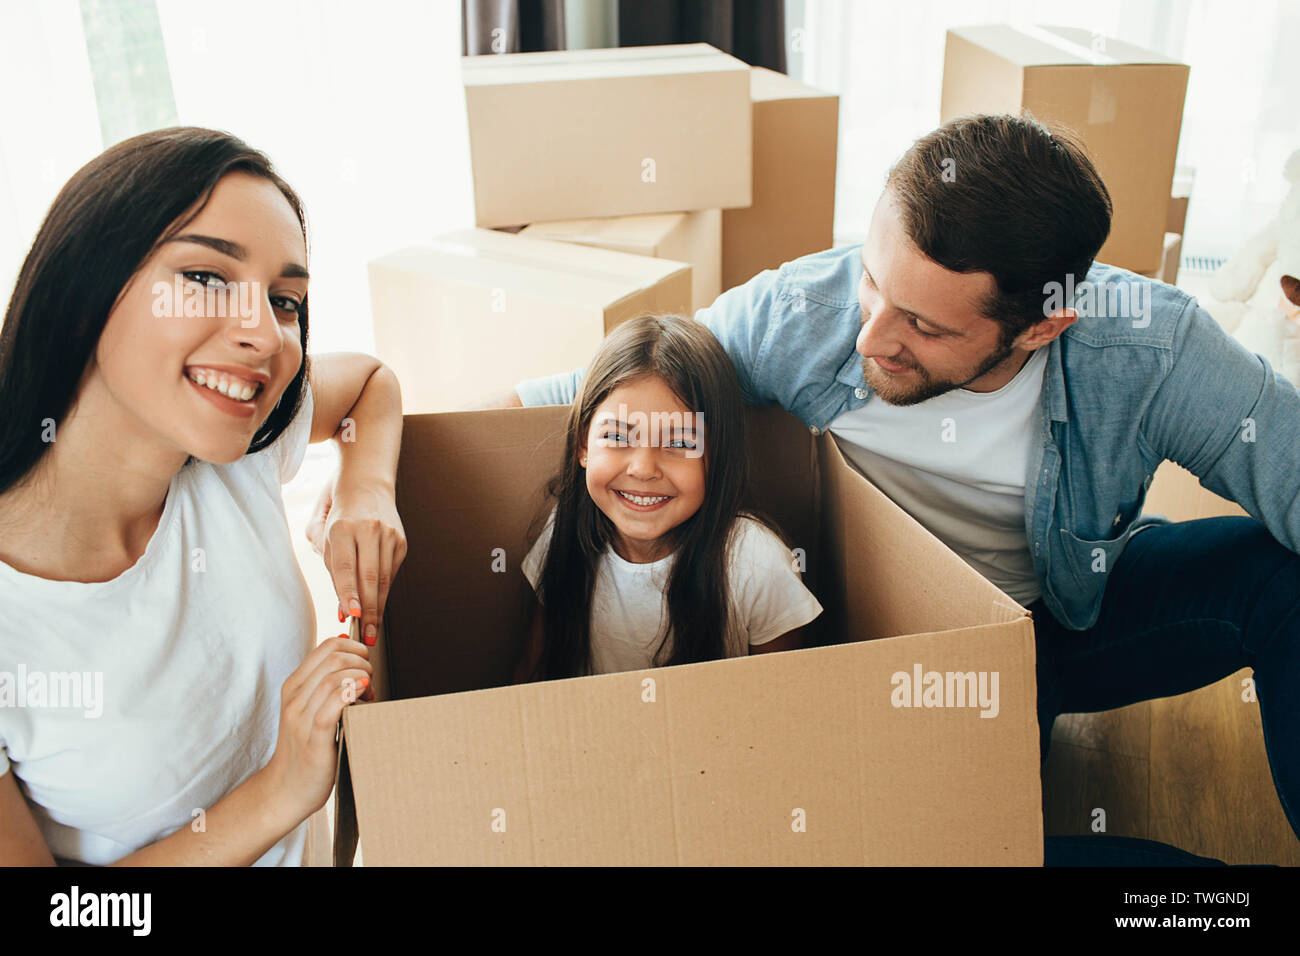 Happy family having fun while moving into new apartment. Mother, father and daughter together smiling, with Cardboard boxes on background Stock Photo